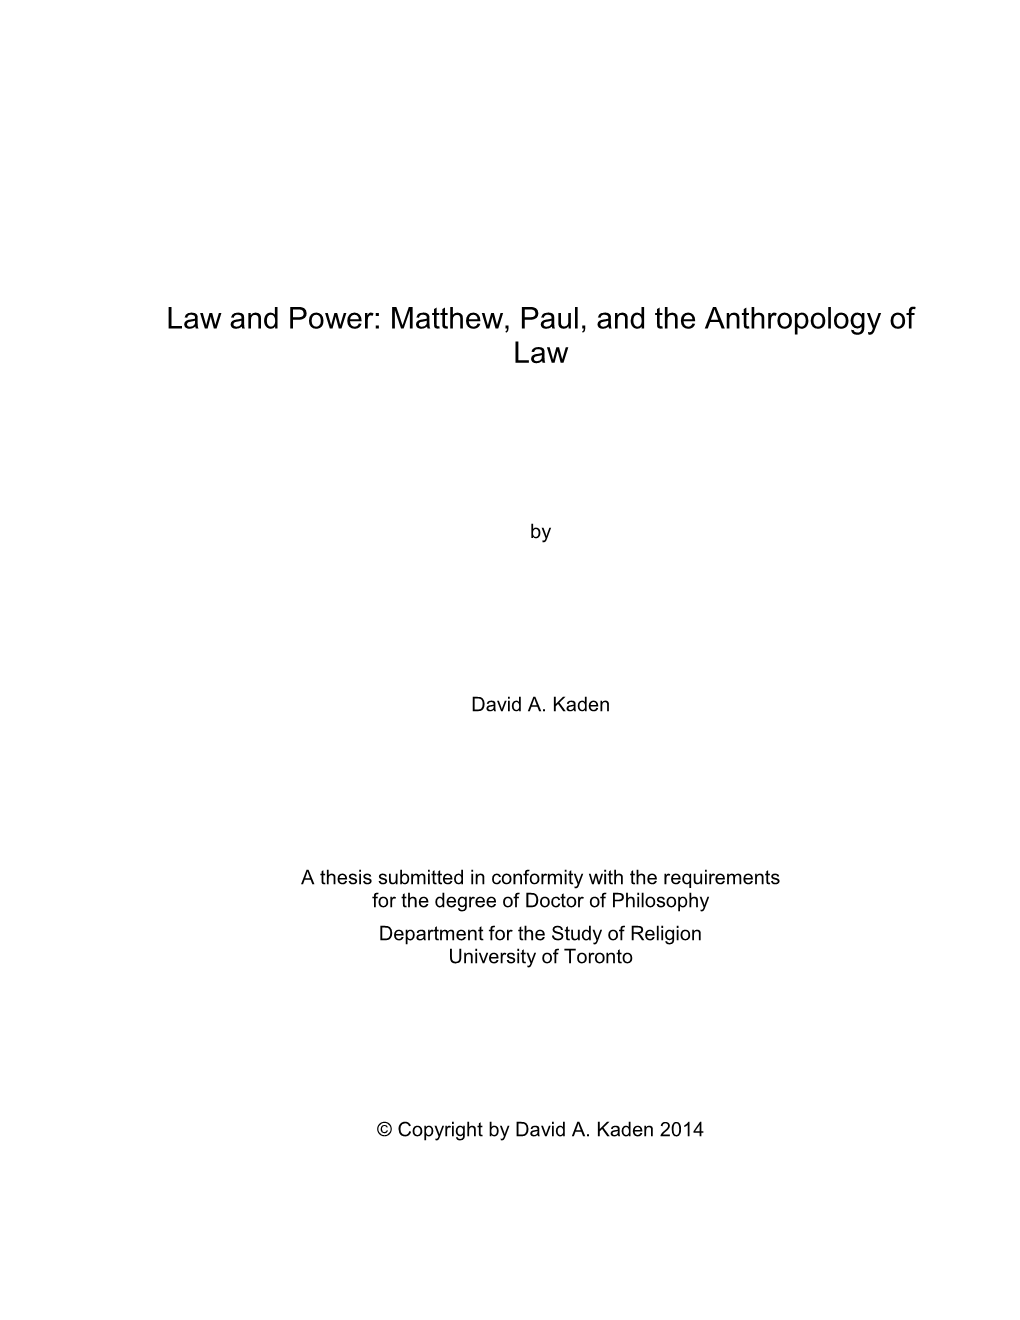 Law and Power: Matthew, Paul, and the Anthropology of Law